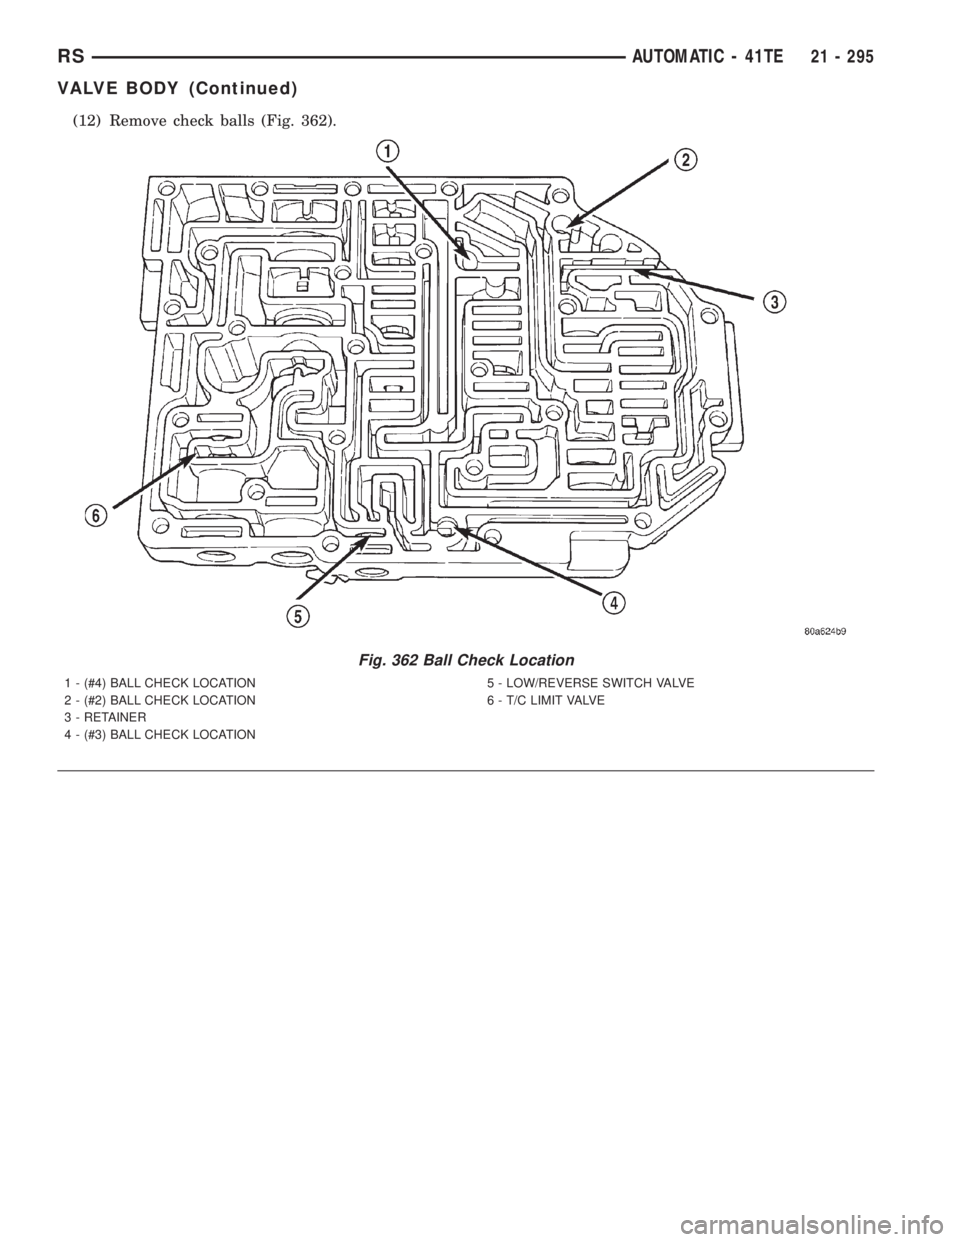 CHRYSLER VOYAGER 2001  Service Manual (12) Remove check balls (Fig. 362).
Fig. 362 Ball Check Location
1 - (#4) BALL CHECK LOCATION
2 - (#2) BALL CHECK LOCATION
3 - RETAINER
4 - (#3) BALL CHECK LOCATION5 - LOW/REVERSE SWITCH VALVE
6 - T/C